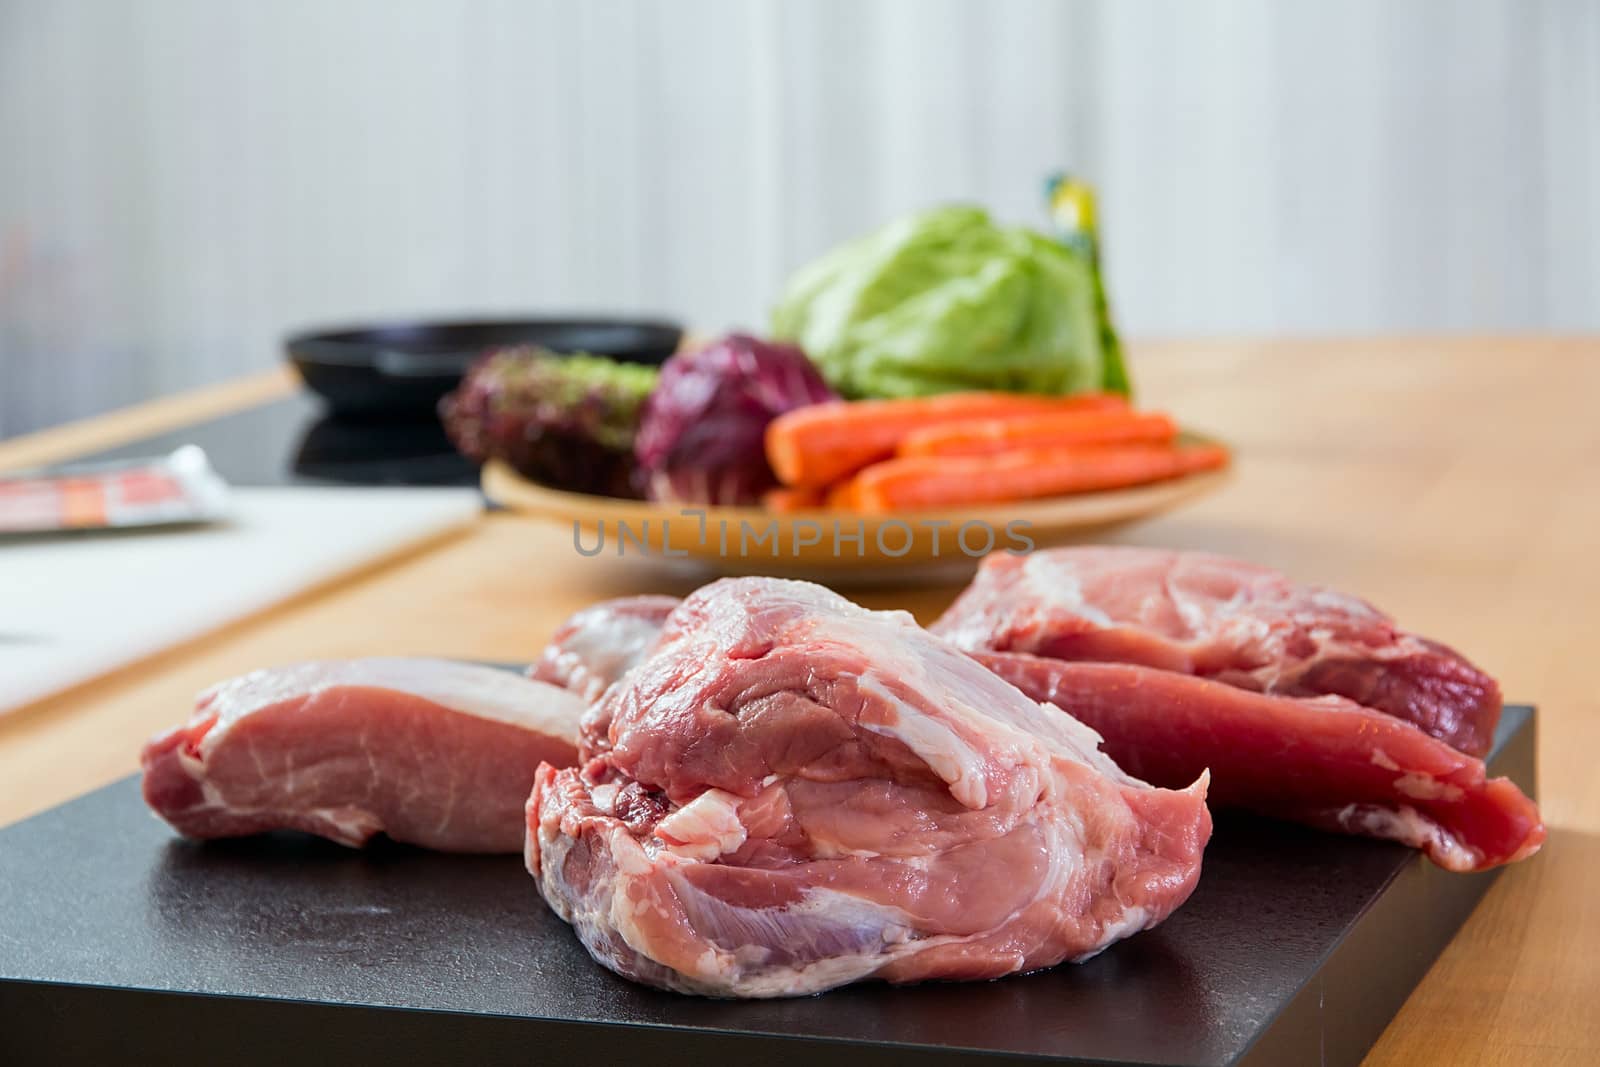 Meat parts on the table with vegetables at background